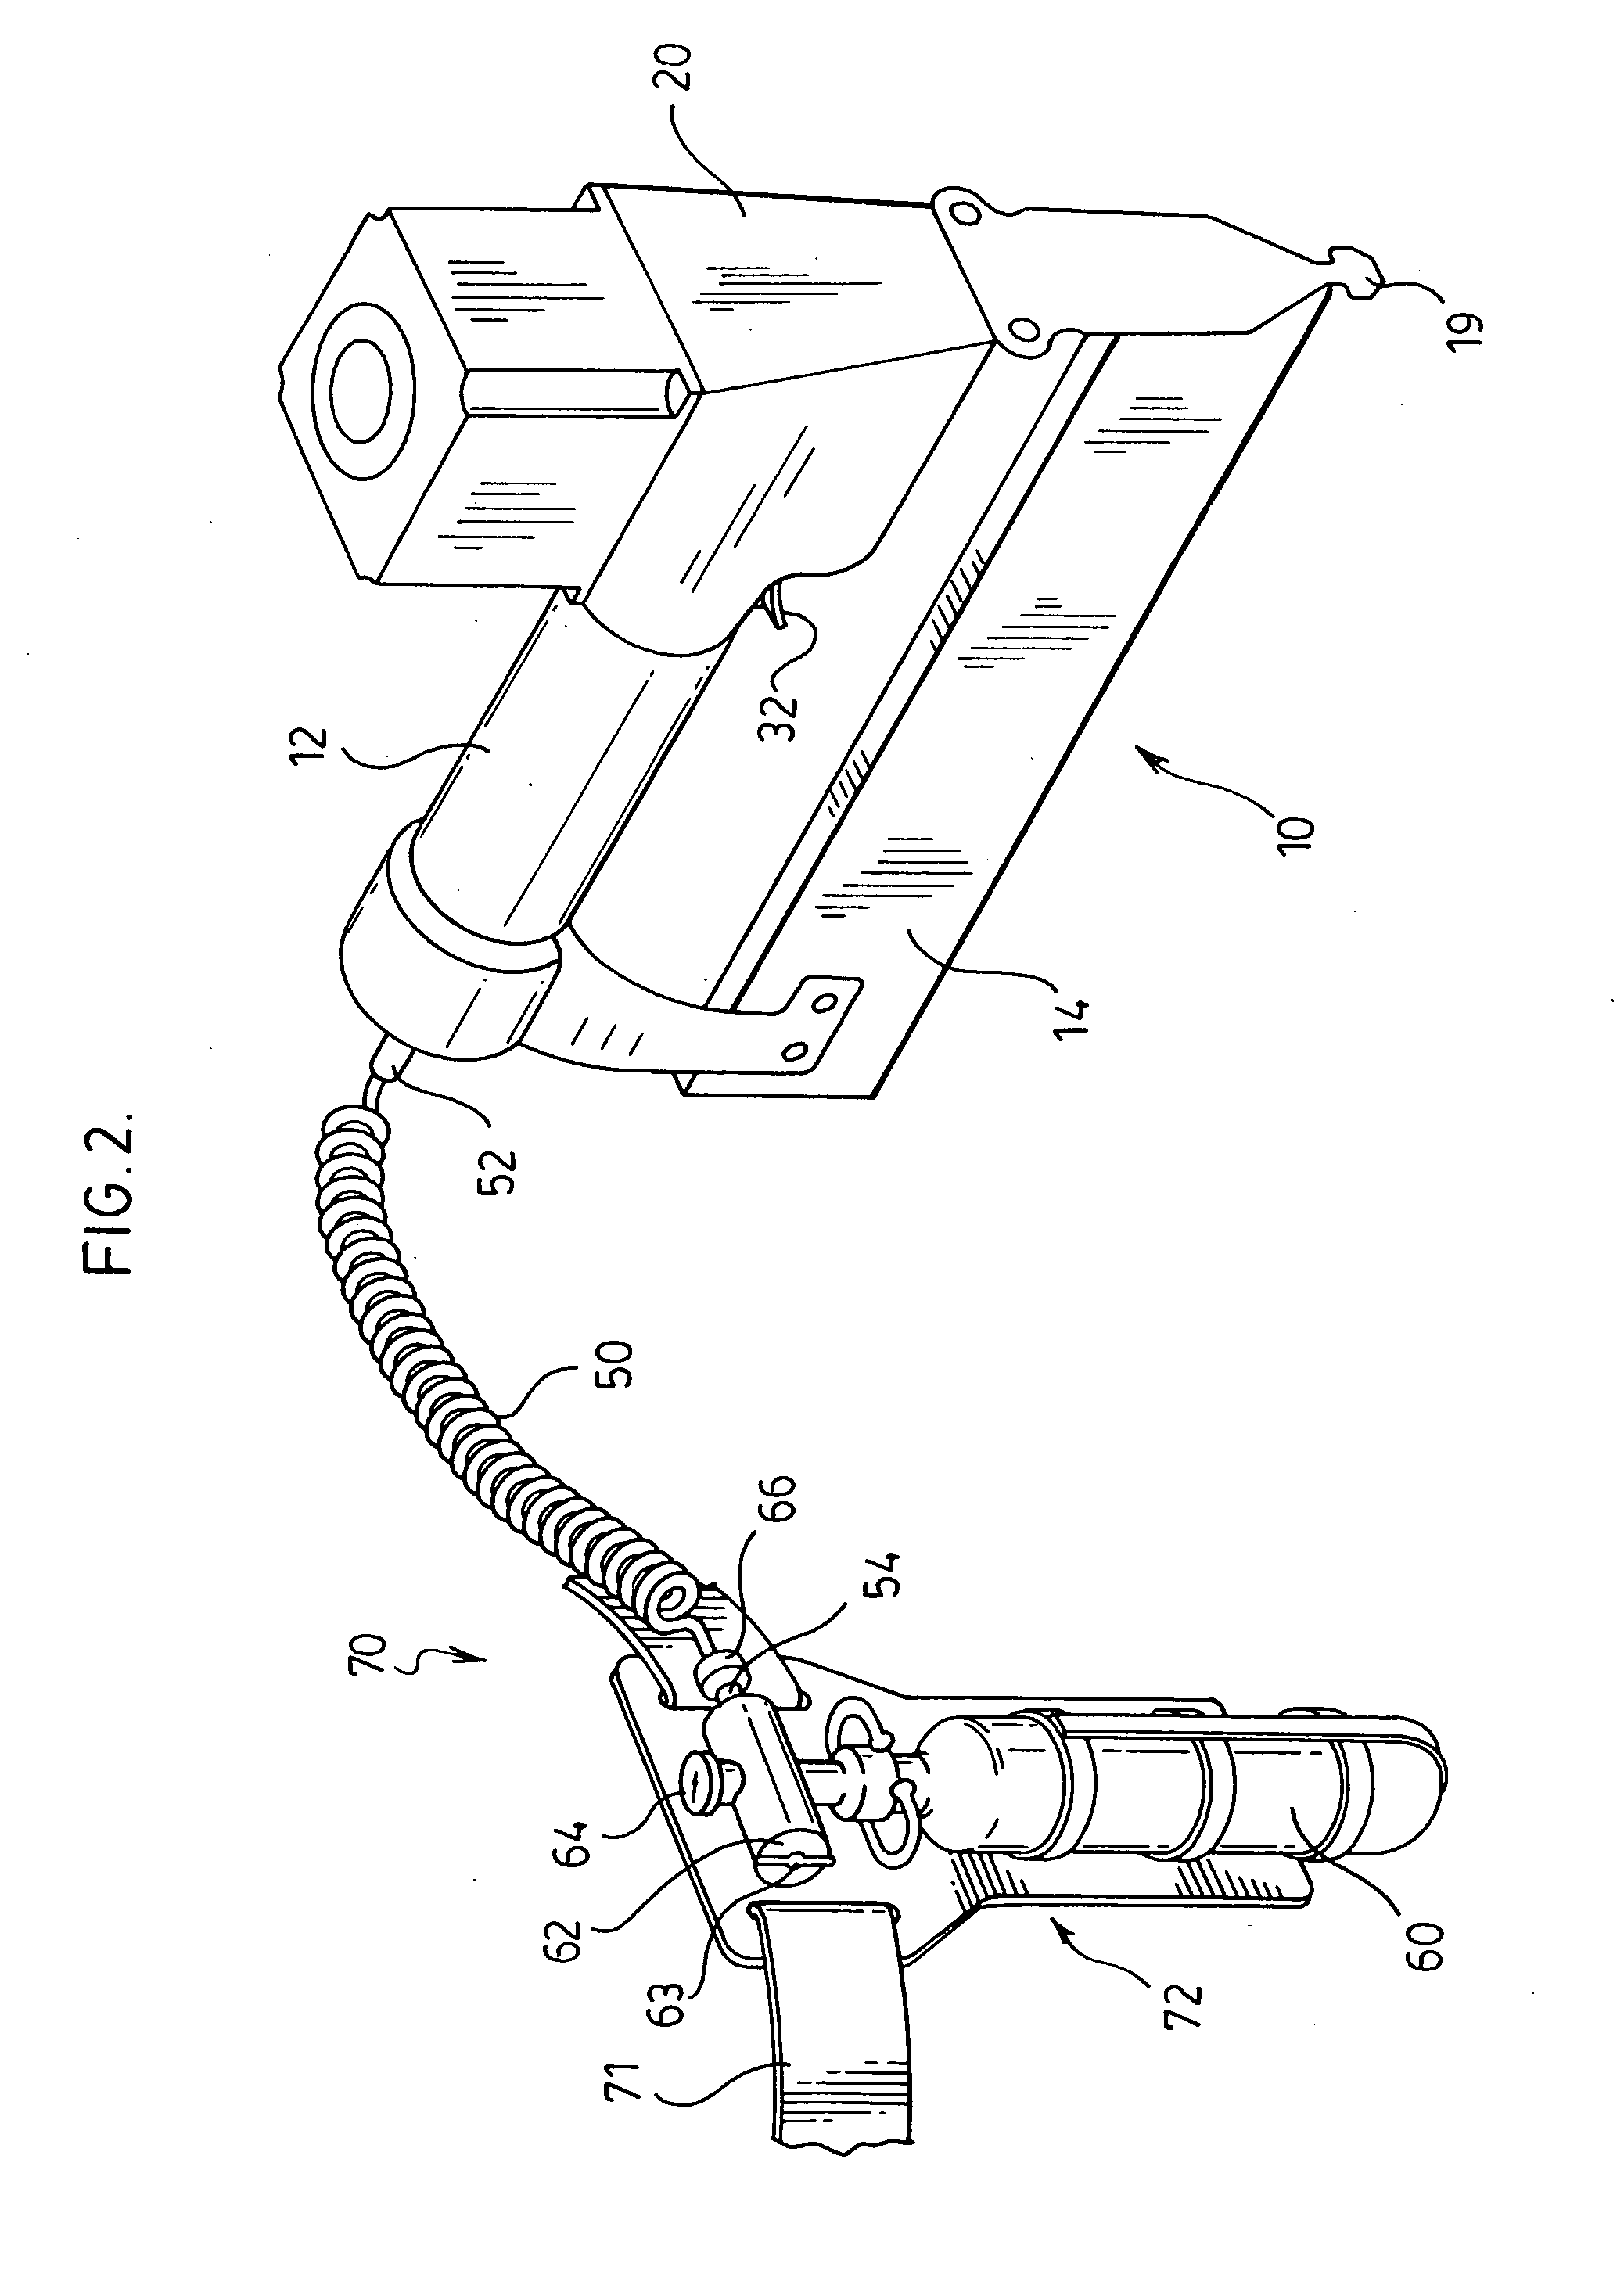 Pneumatic fastener driving system with self-contained gas source